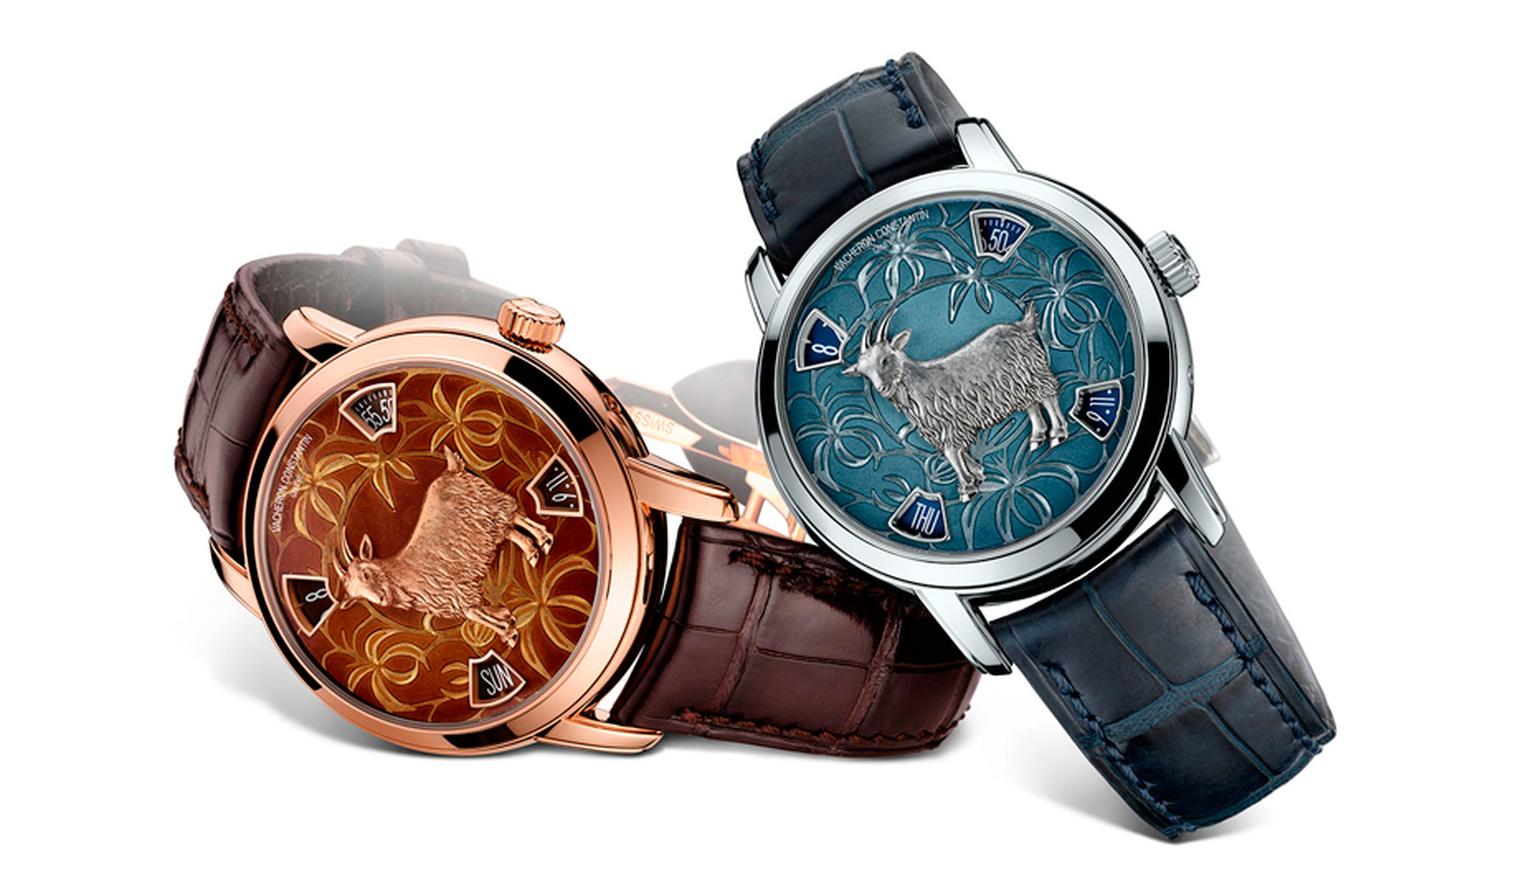 2015 is the official Year of the Goat in the Chinese astrological calendar and kicks off on 19 February. Shown here are two models crafted by Vacheron Constantin to honour the occasion, one in red gold, the other in platinum with beautifully etched and en